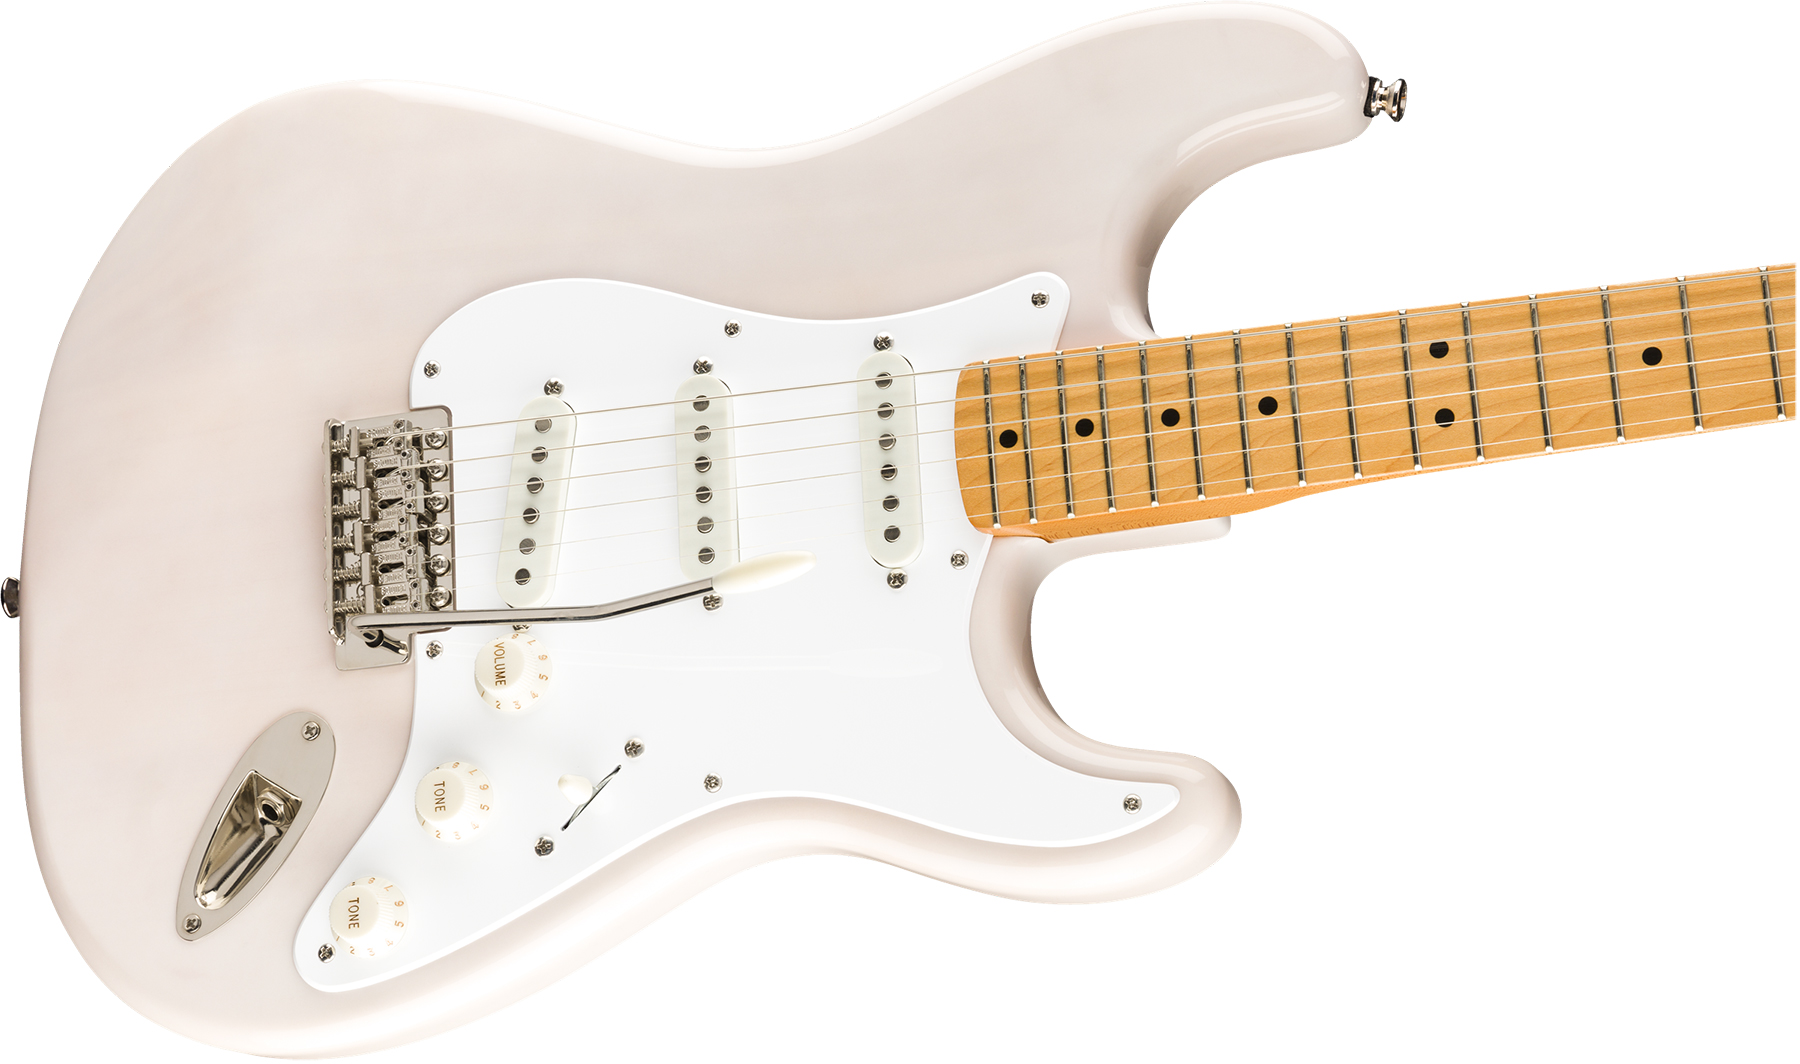 Squier Strat '50s Classic Vibe 2019 Mn 2019 - White Blonde - Str shape electric guitar - Variation 2